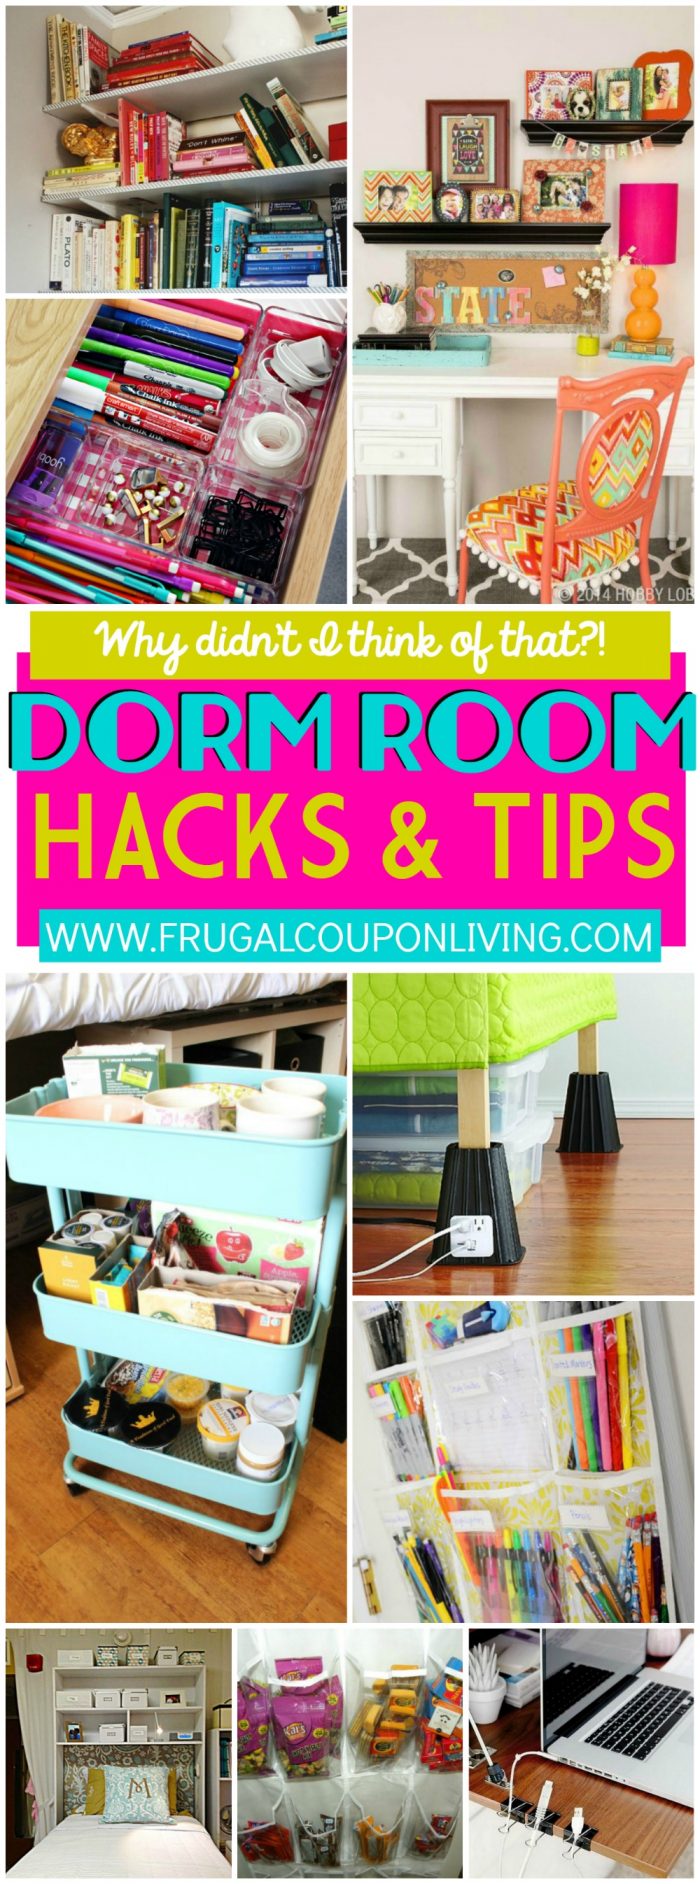 Going to College? Dorm Room Hacks and Tips!